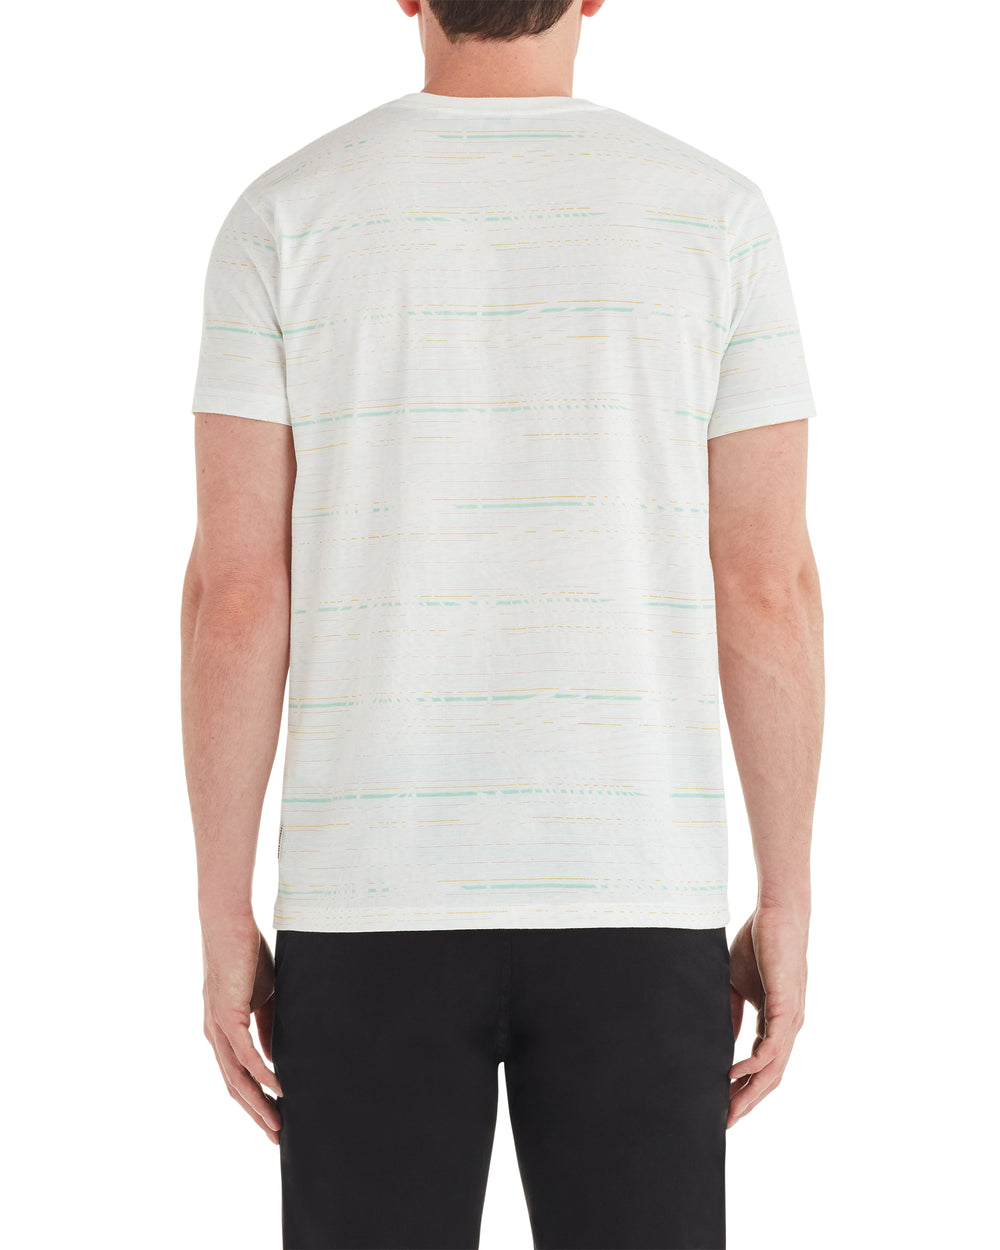 Palm Striped Styled Tee - White